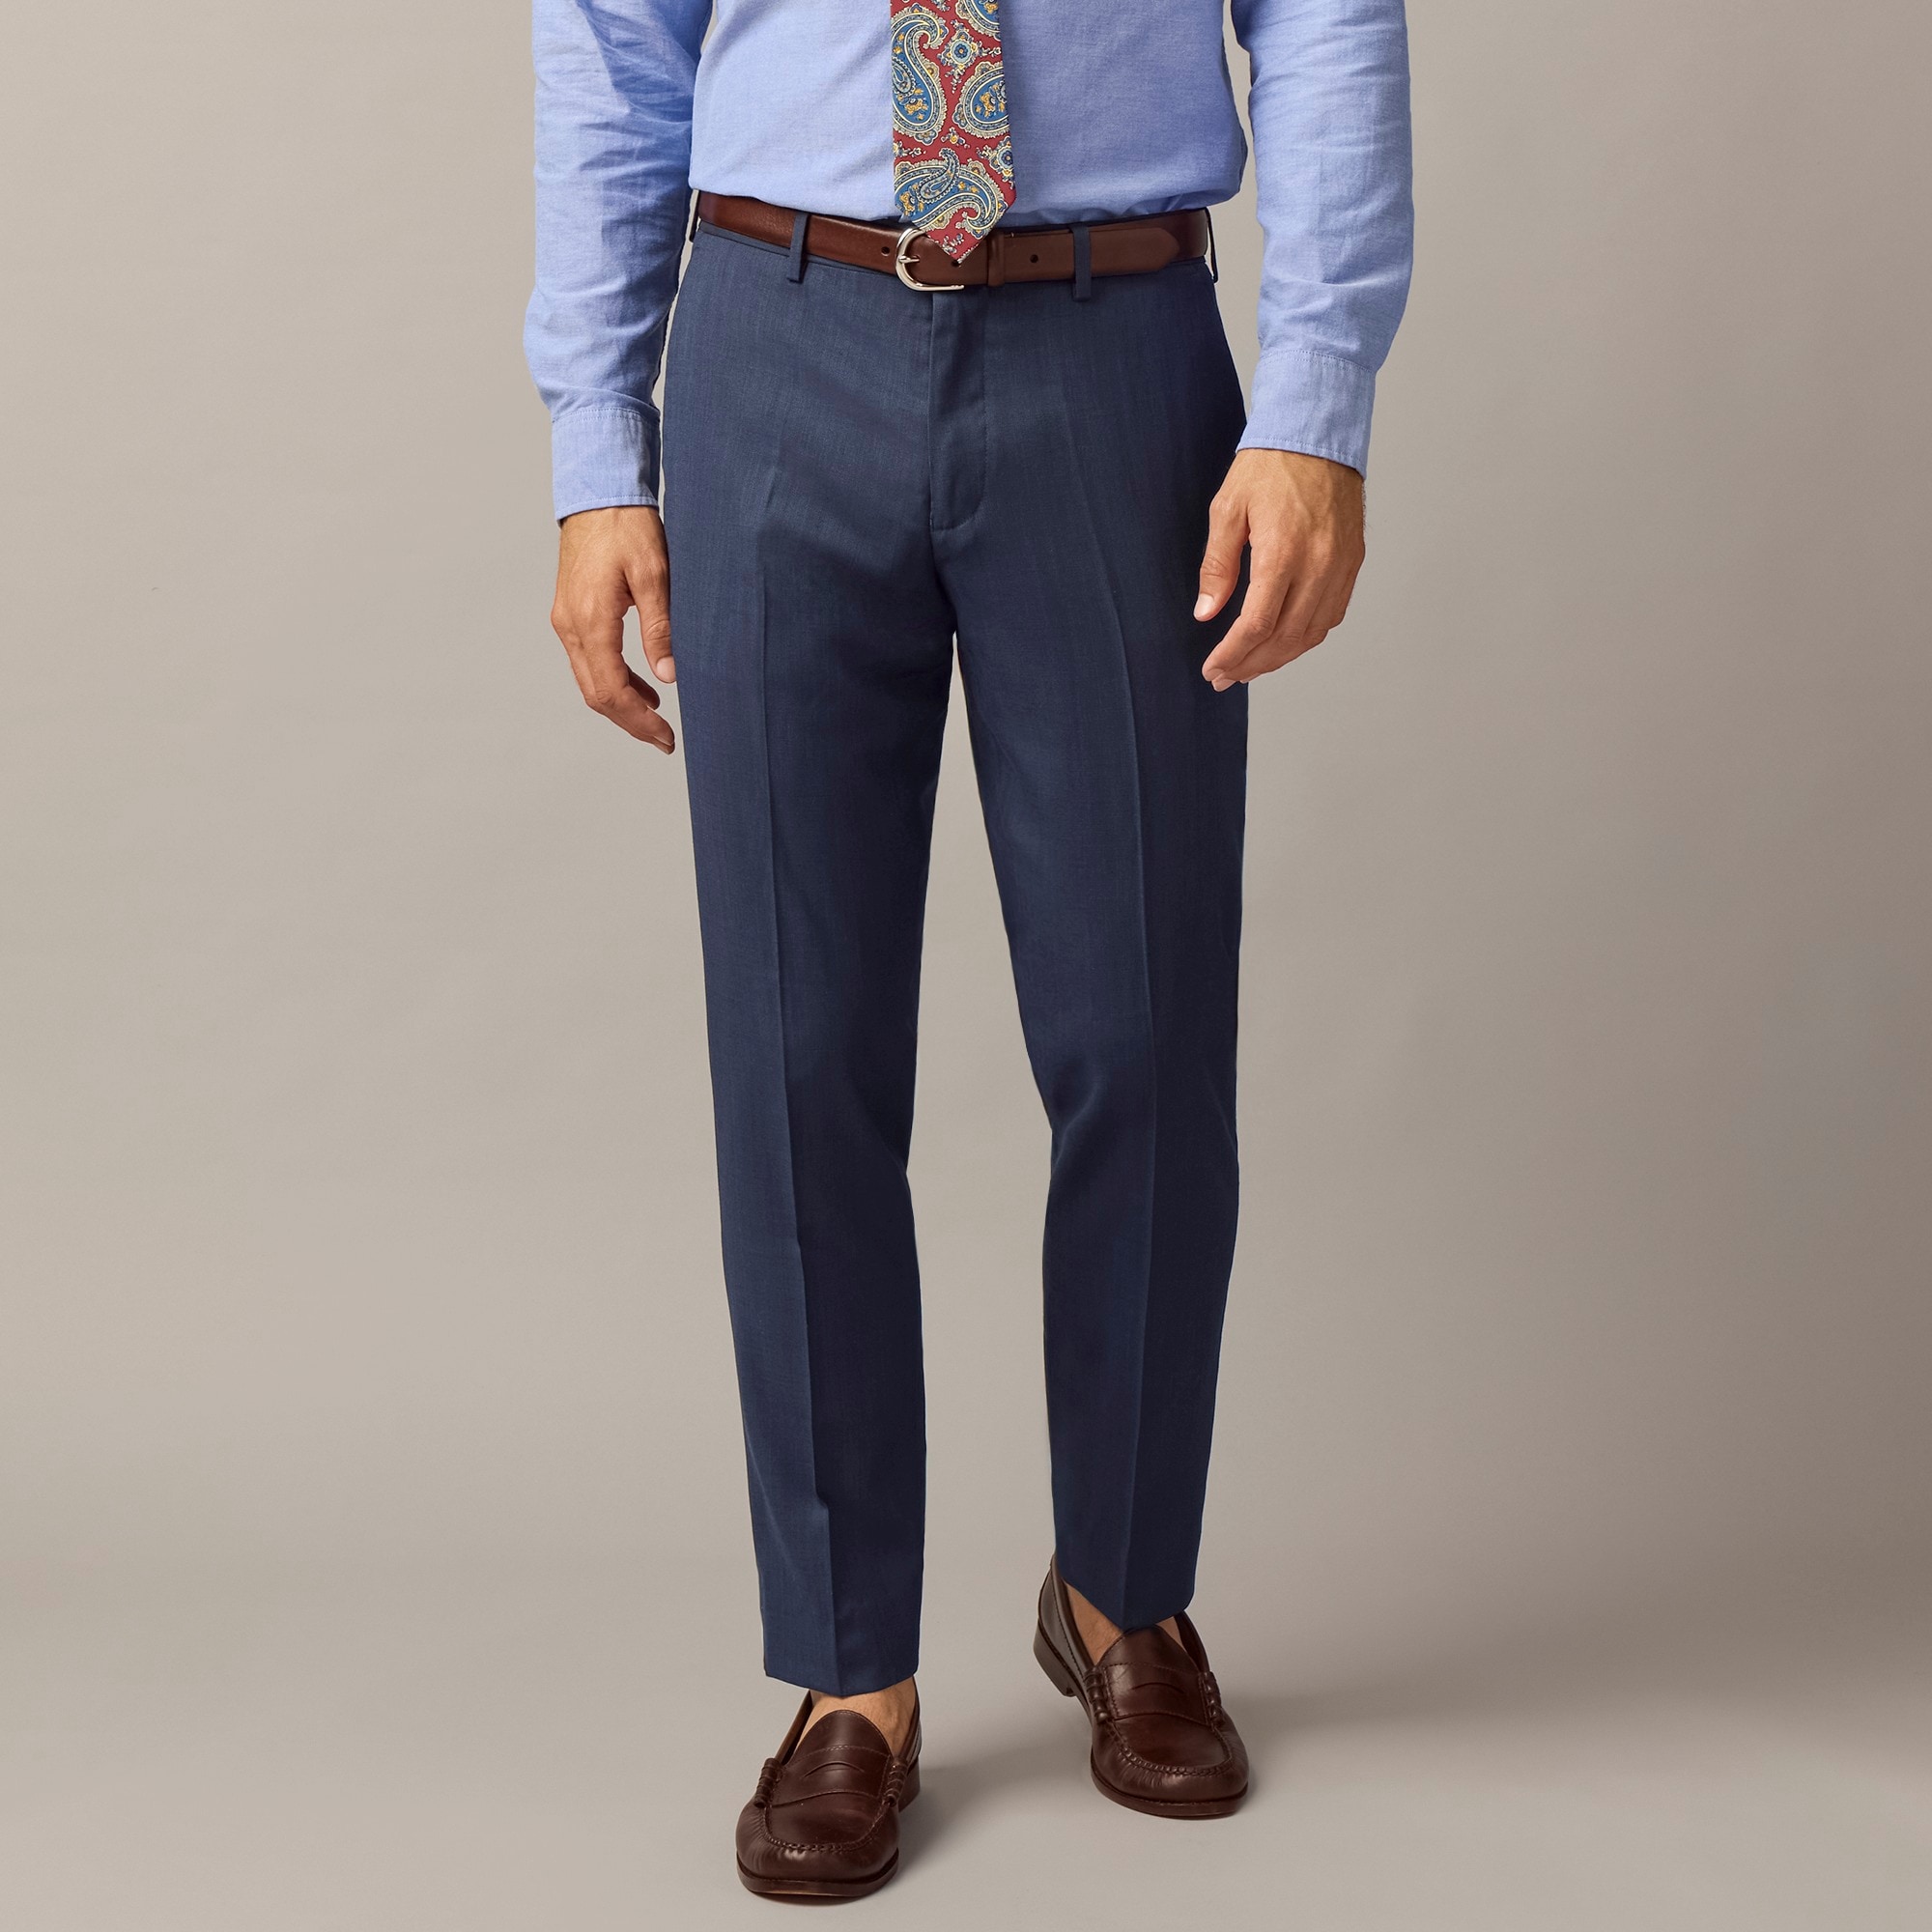  Ludlow Slim-fit suit pant in Italian stretch worsted wool